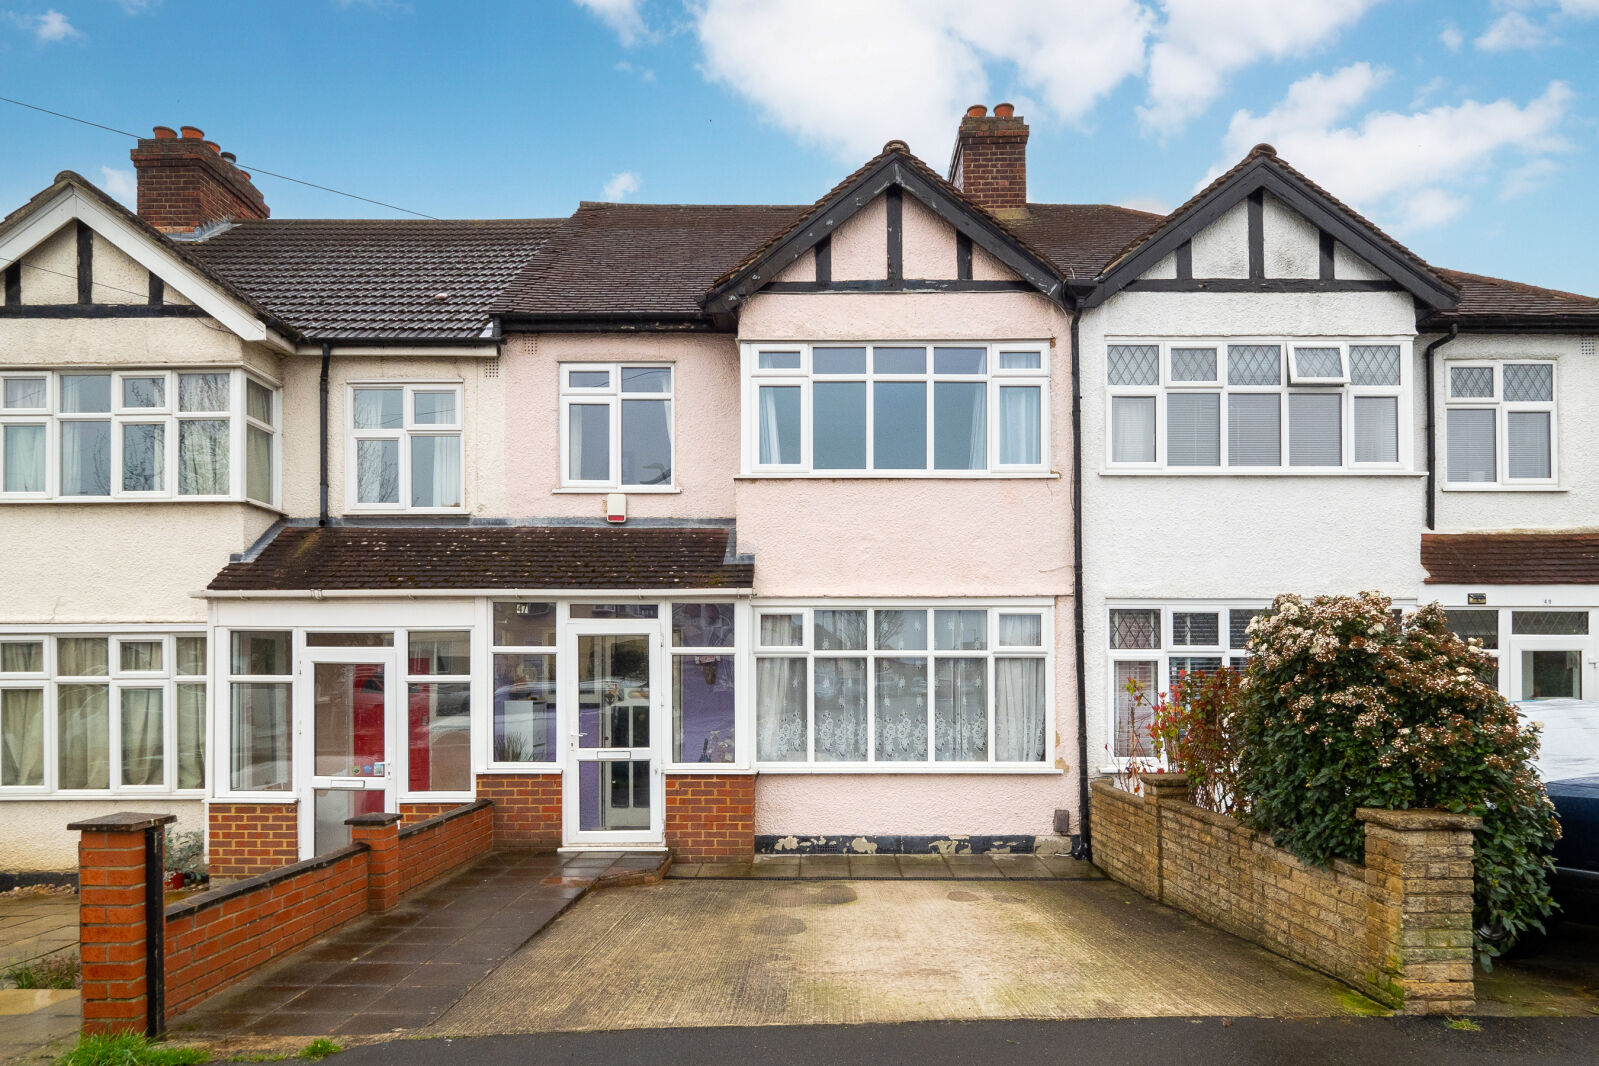 3 bedroom mid terraced house for sale Burleigh Road, Sutton, SM3, main image